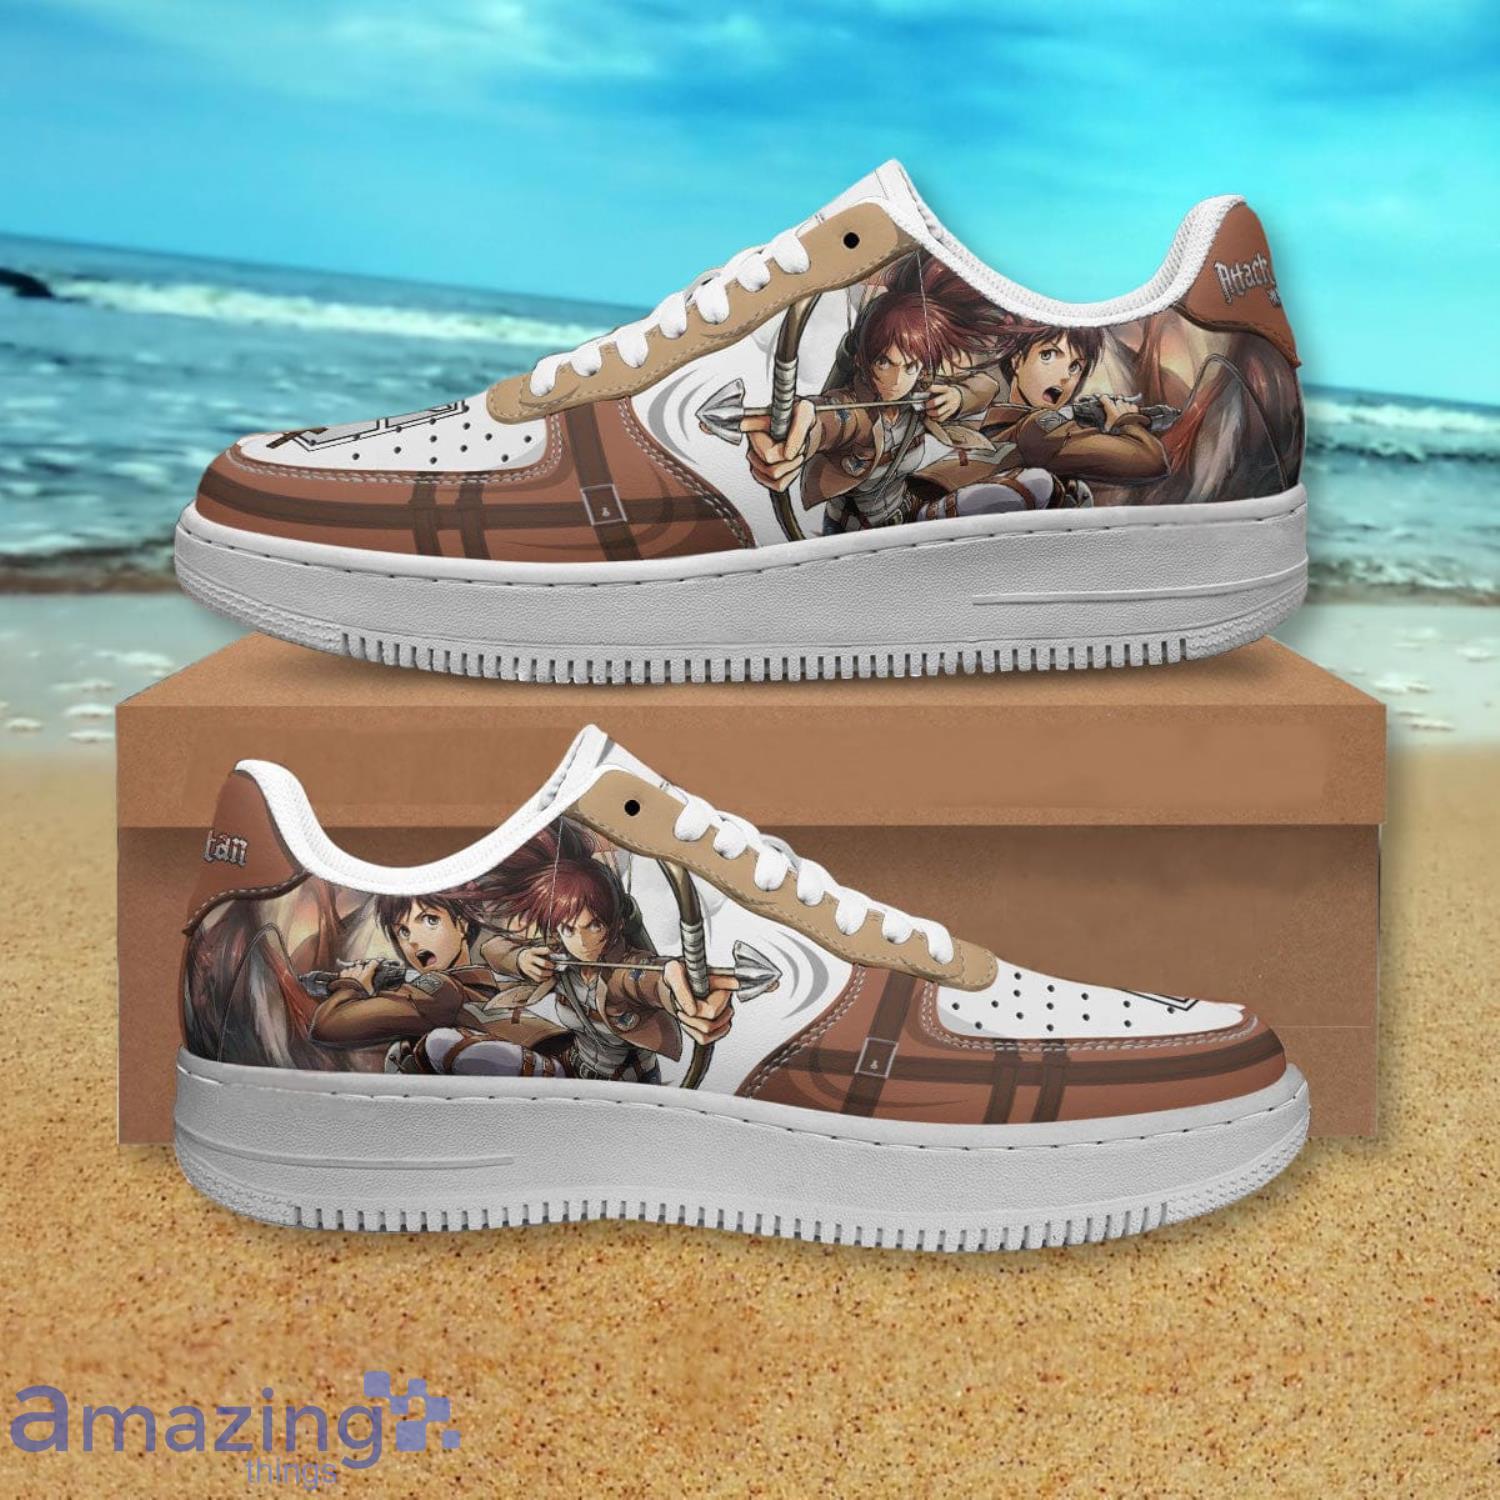 Attack On Titan Sasha Air Force Shoes Gift For Anime's Fans Product Photo 1